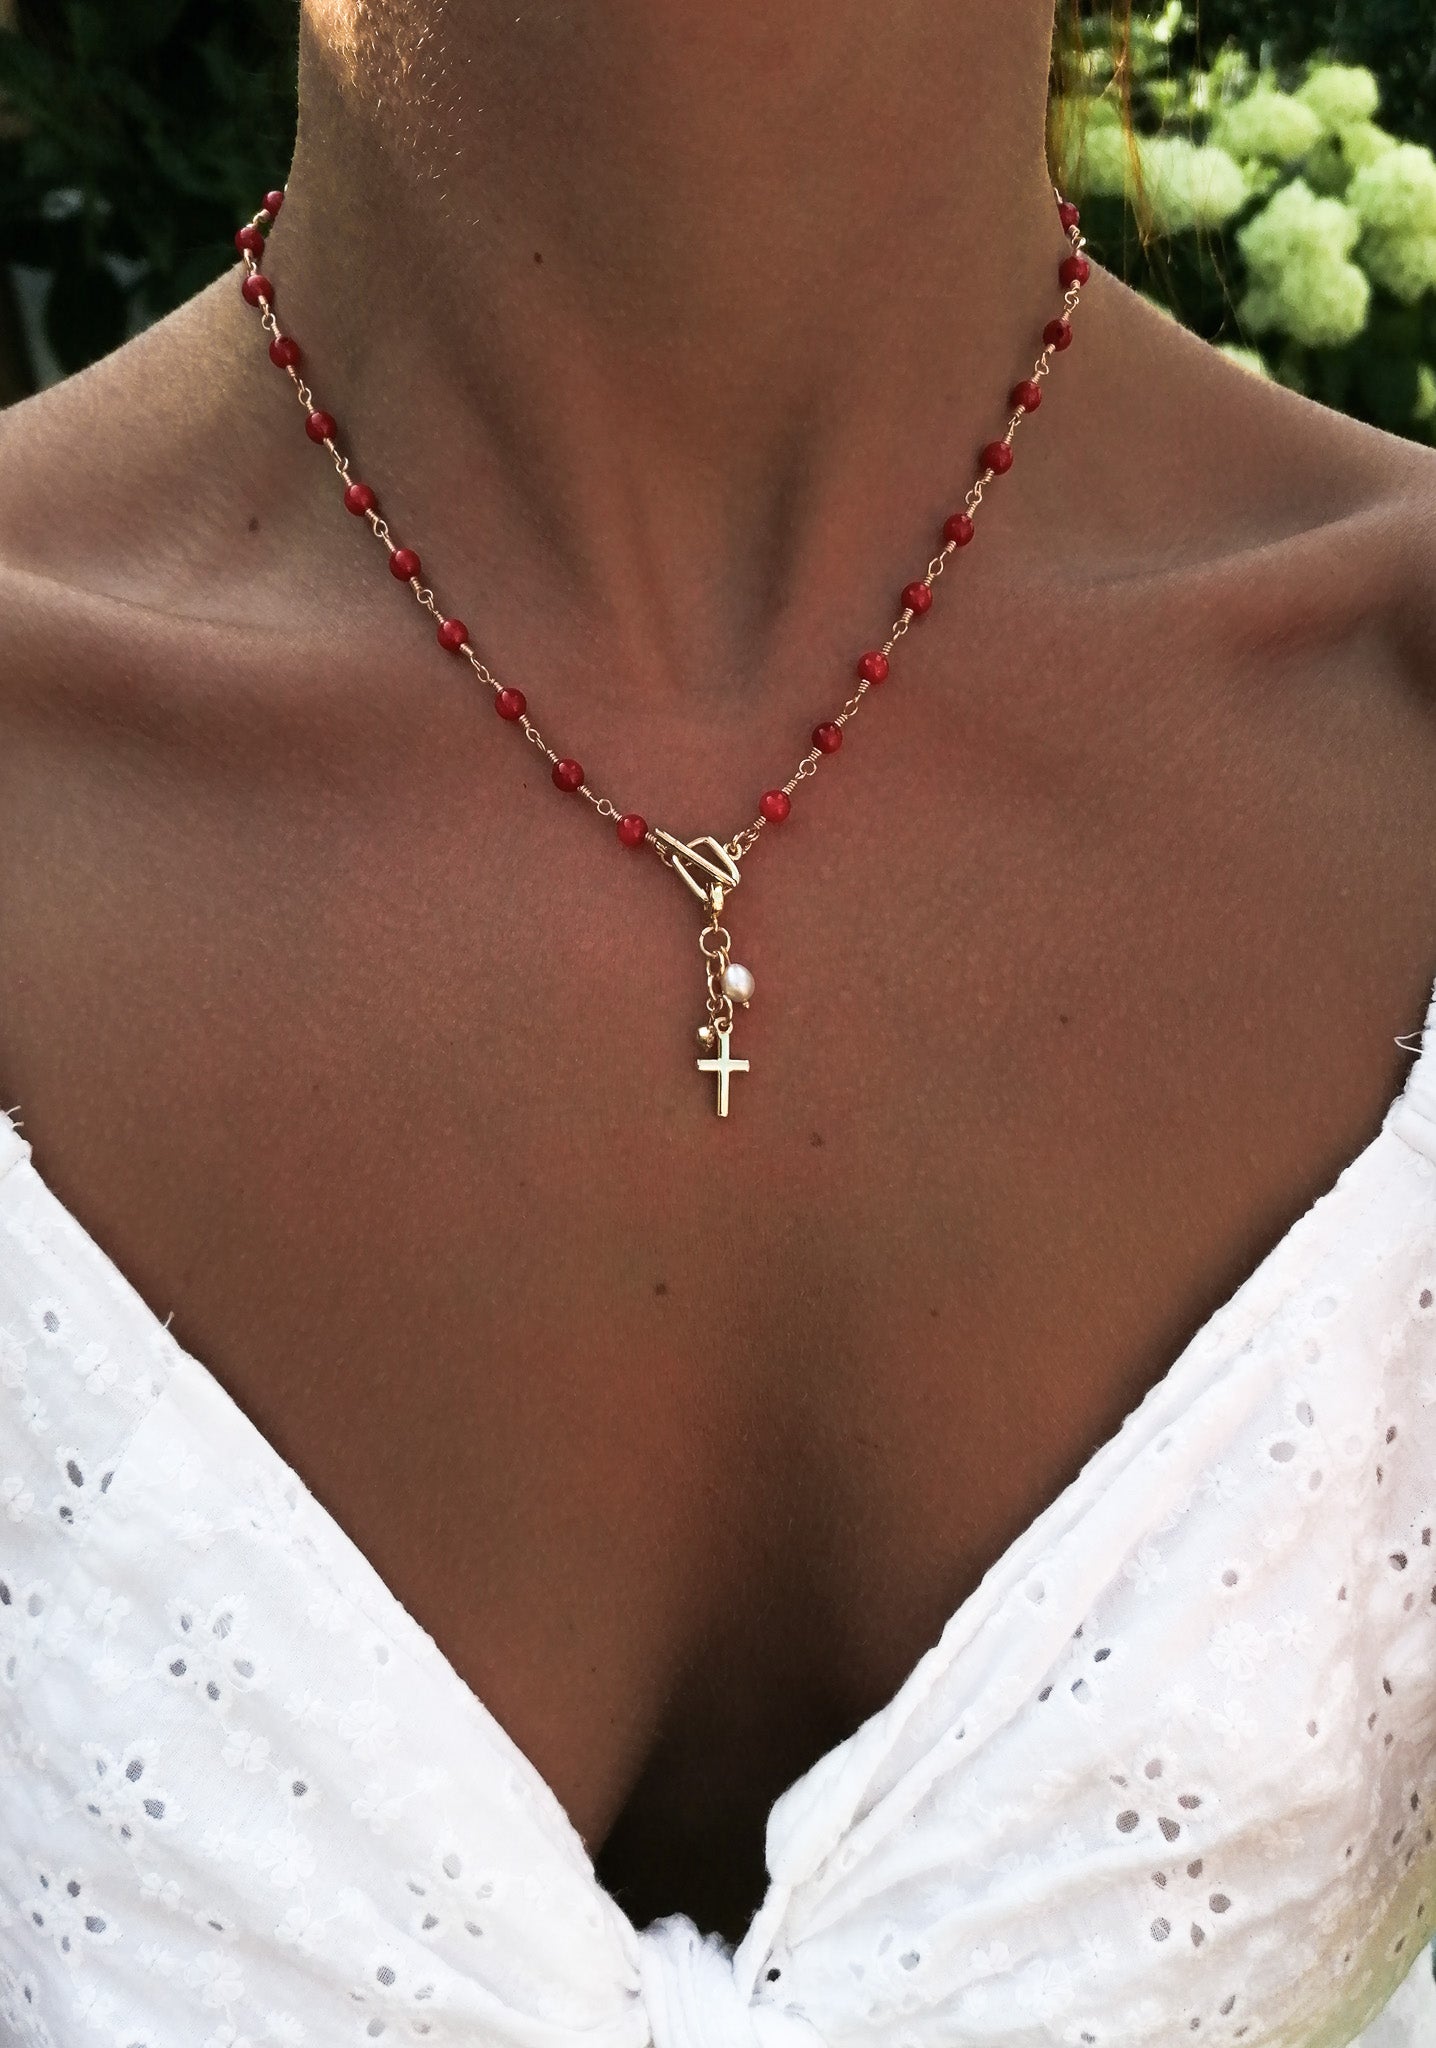 Coral rosary necklace